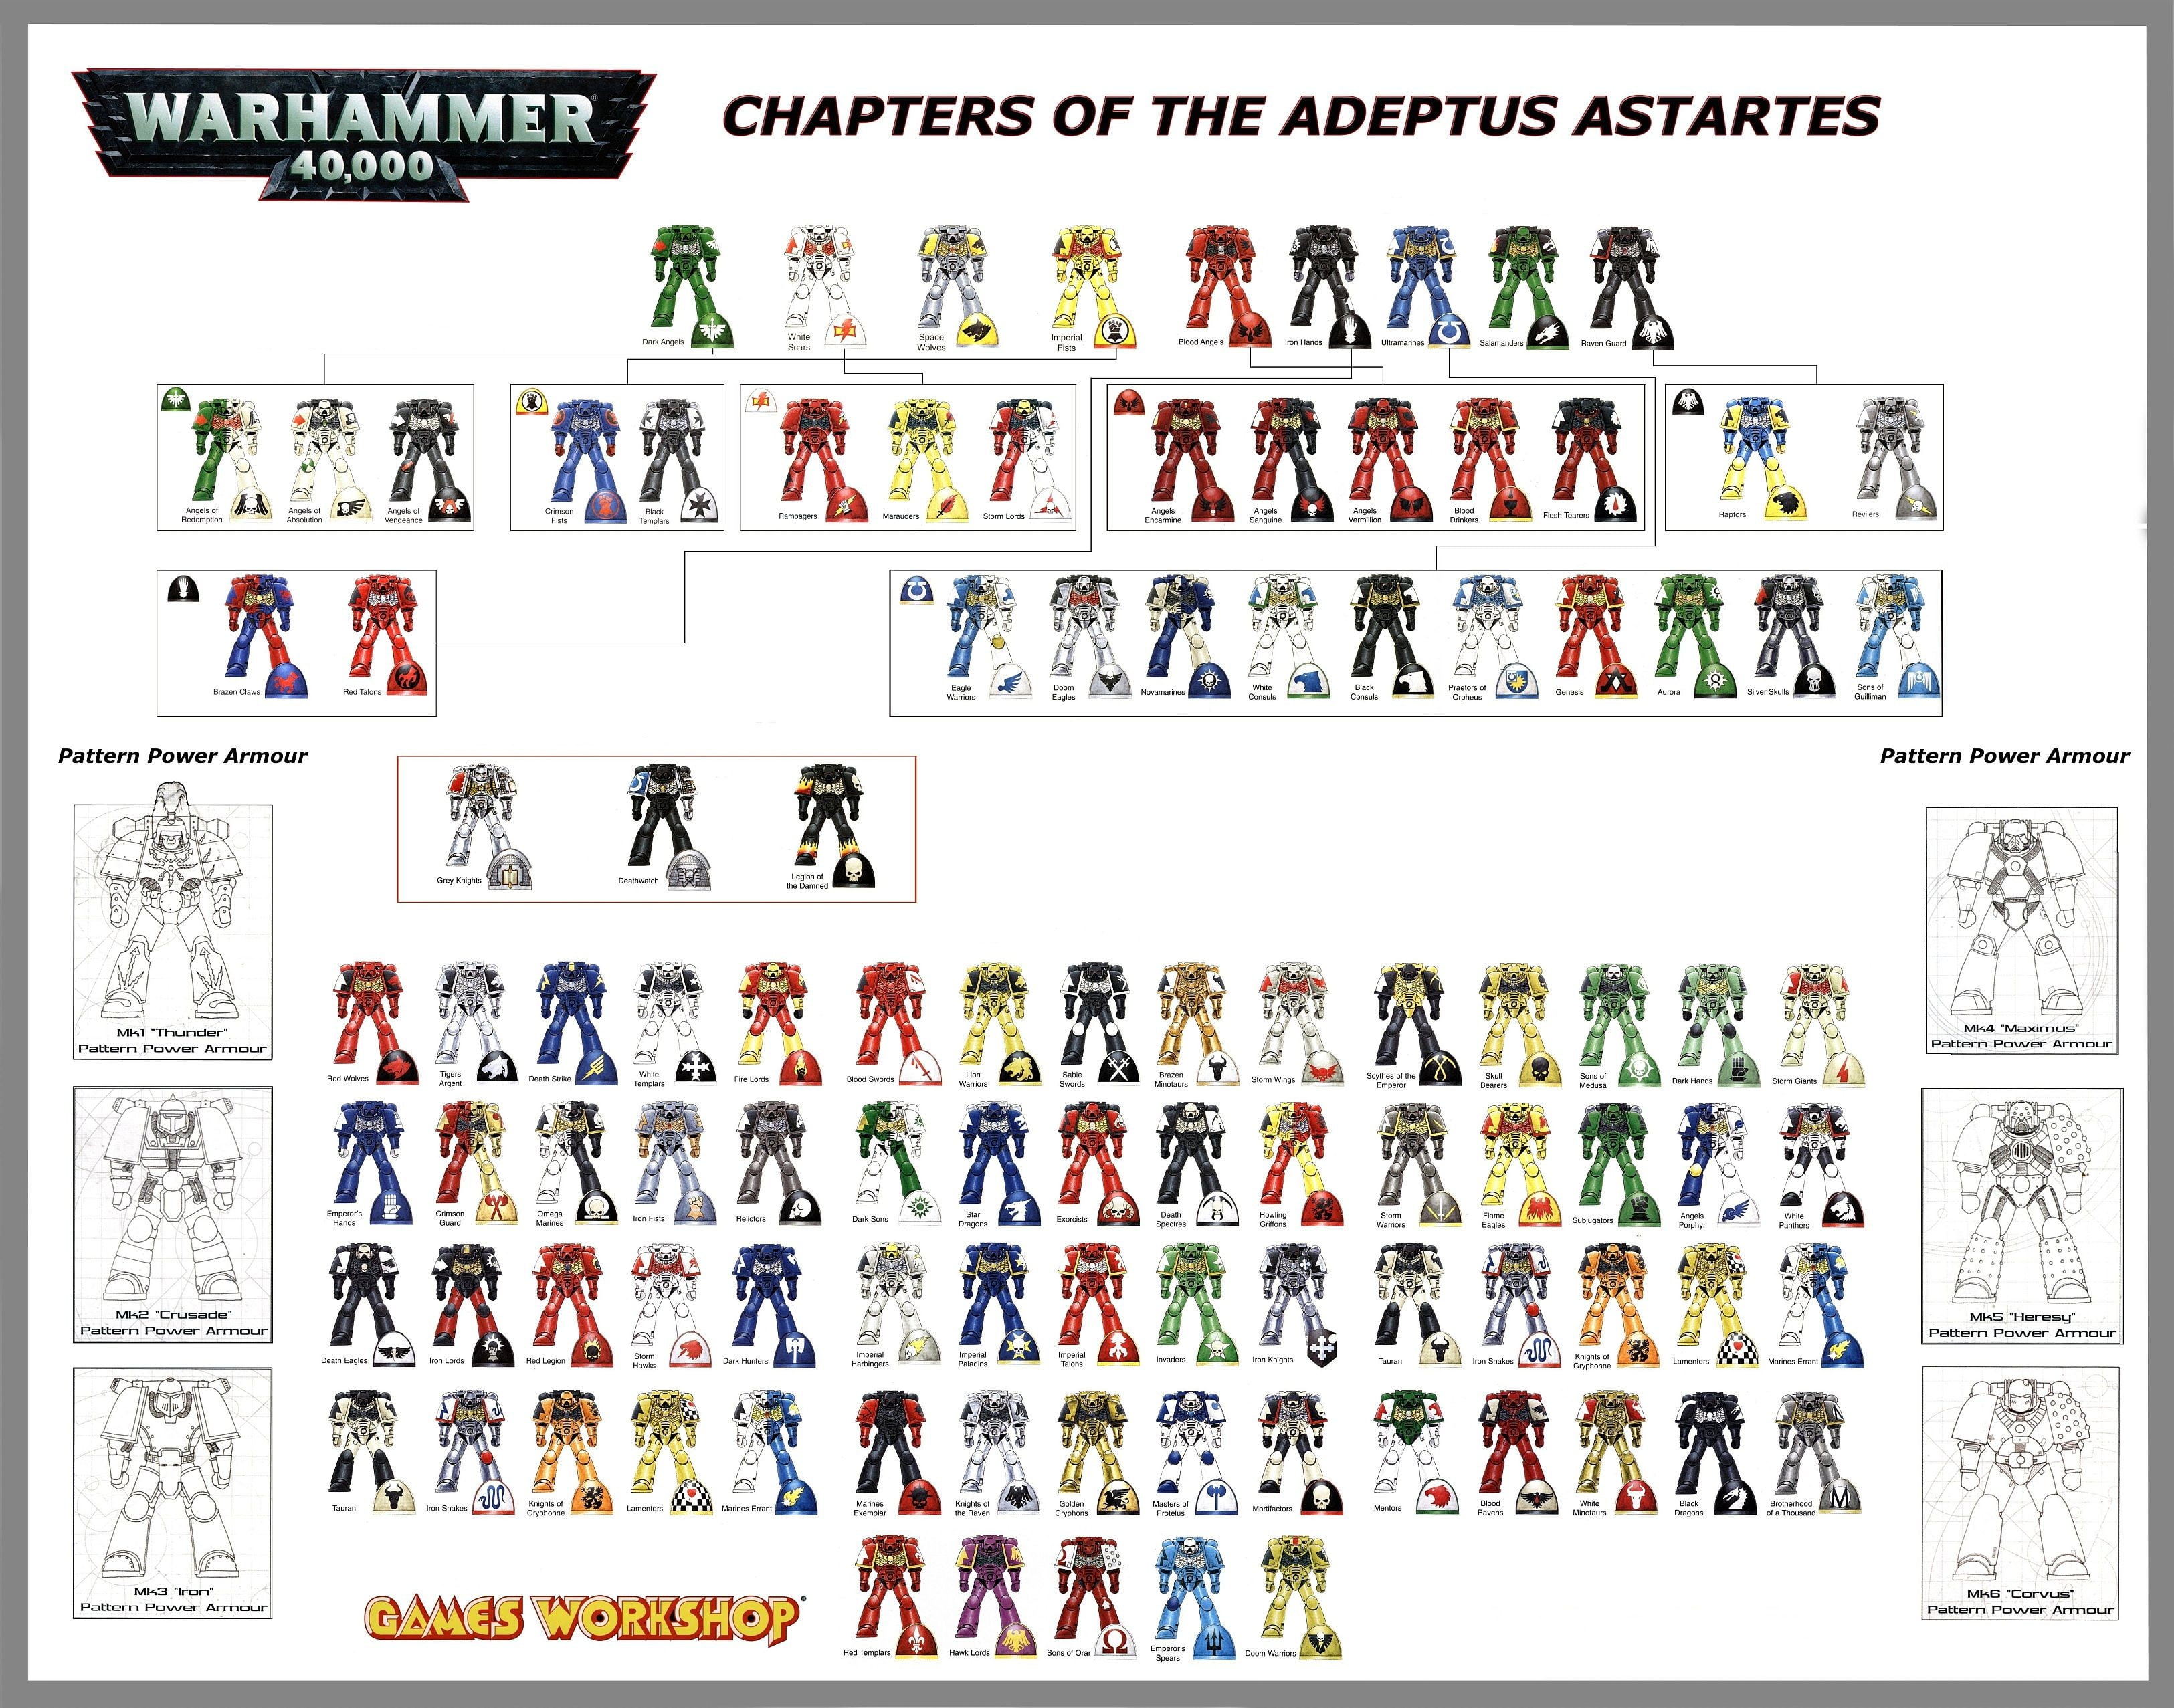 Warhammer chapters of the adeptus astartes robot toy wallpaper